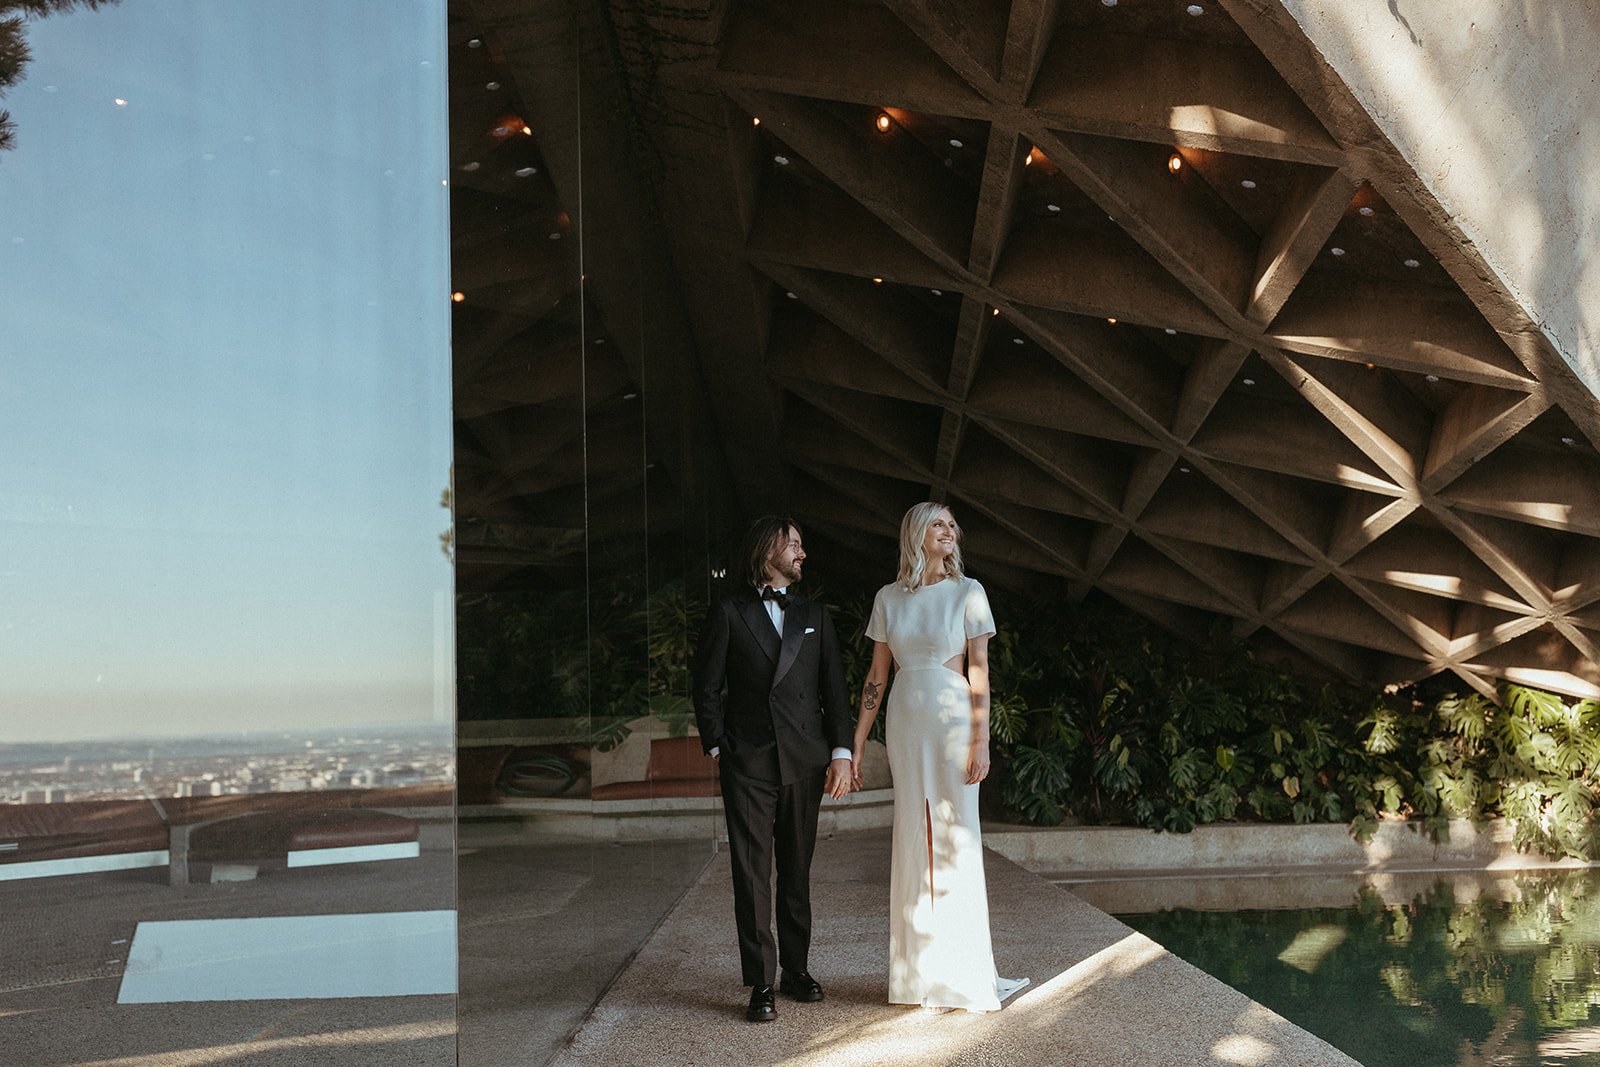 wedding day hair and makeup for this couple's elopement at the Sheats–Goldstein Residence